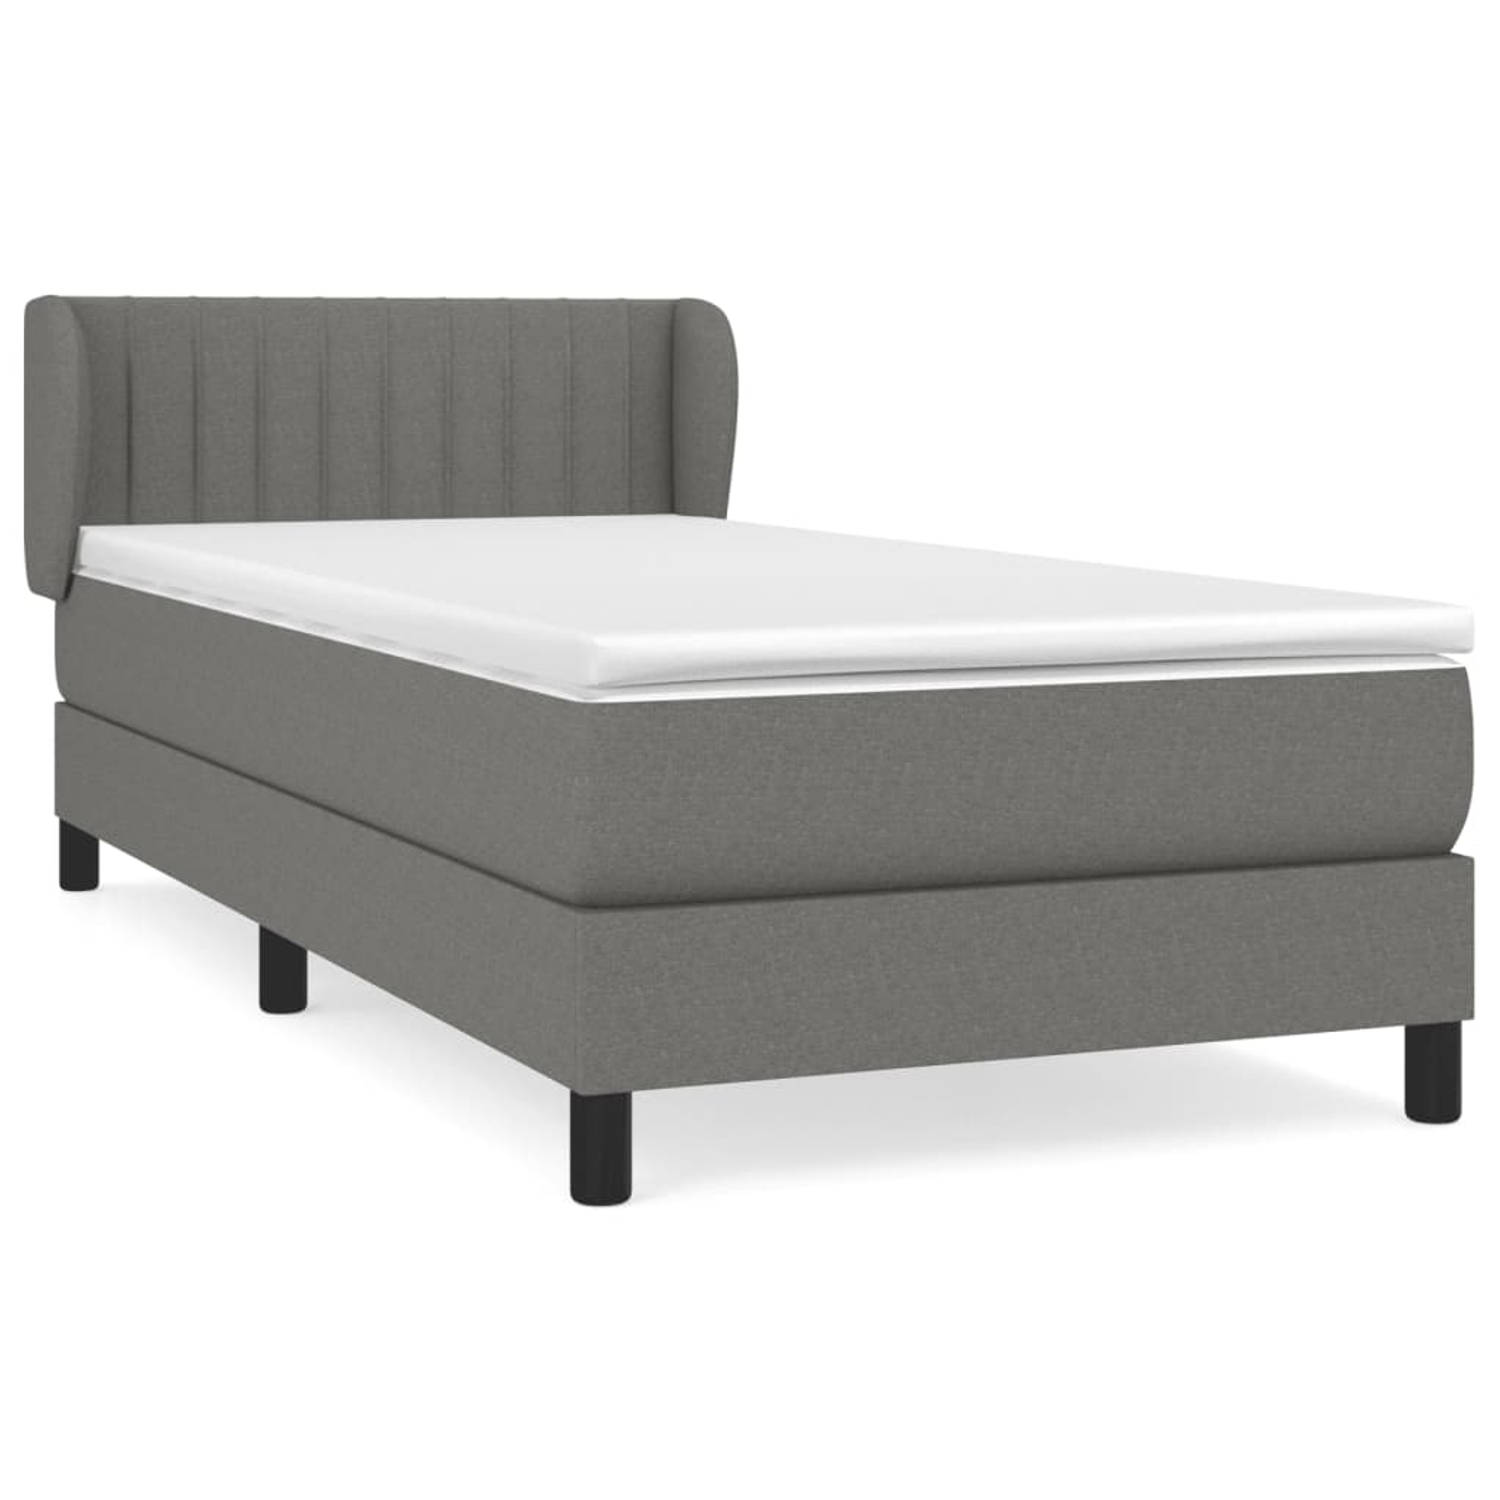 The Living Store Bed Vlinder - Boxspring - 80 x 200 cm - Donkergrijs